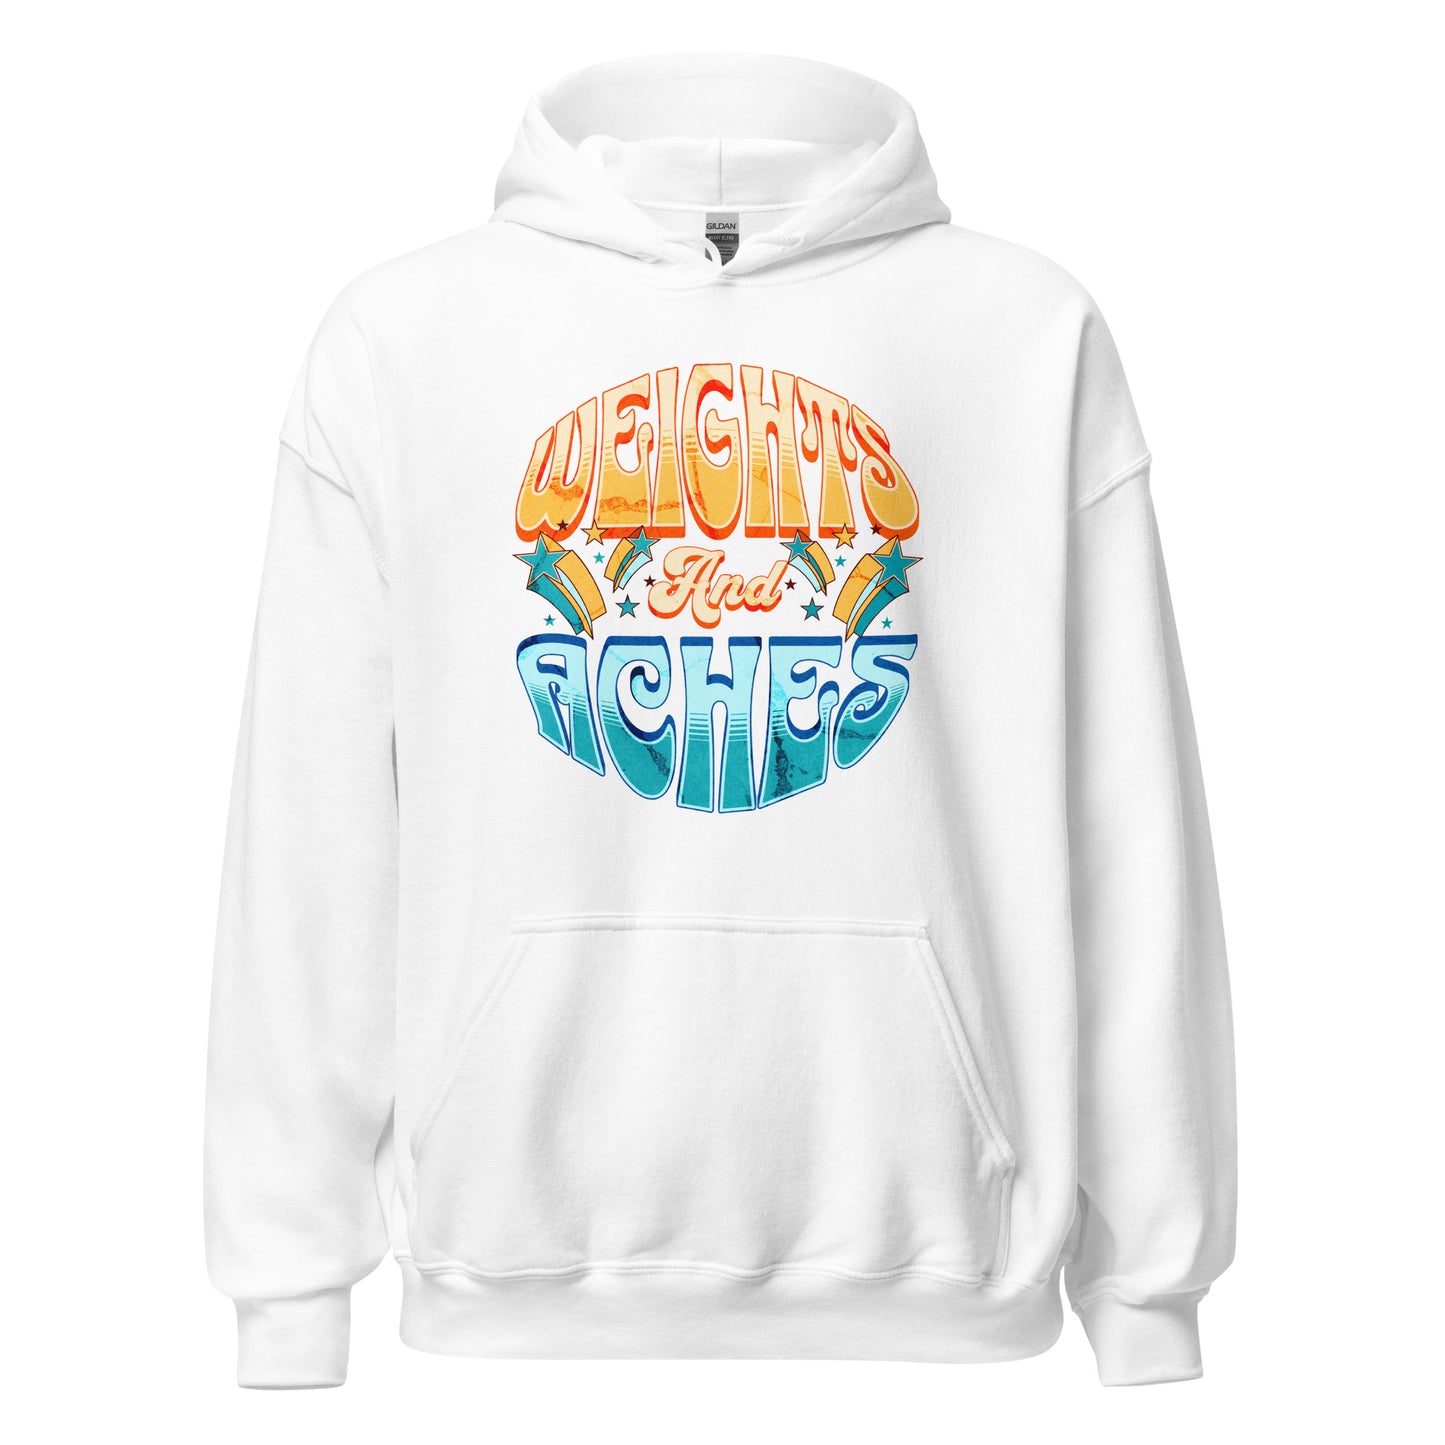 Weights and Aches Retro Unisex Hoodie